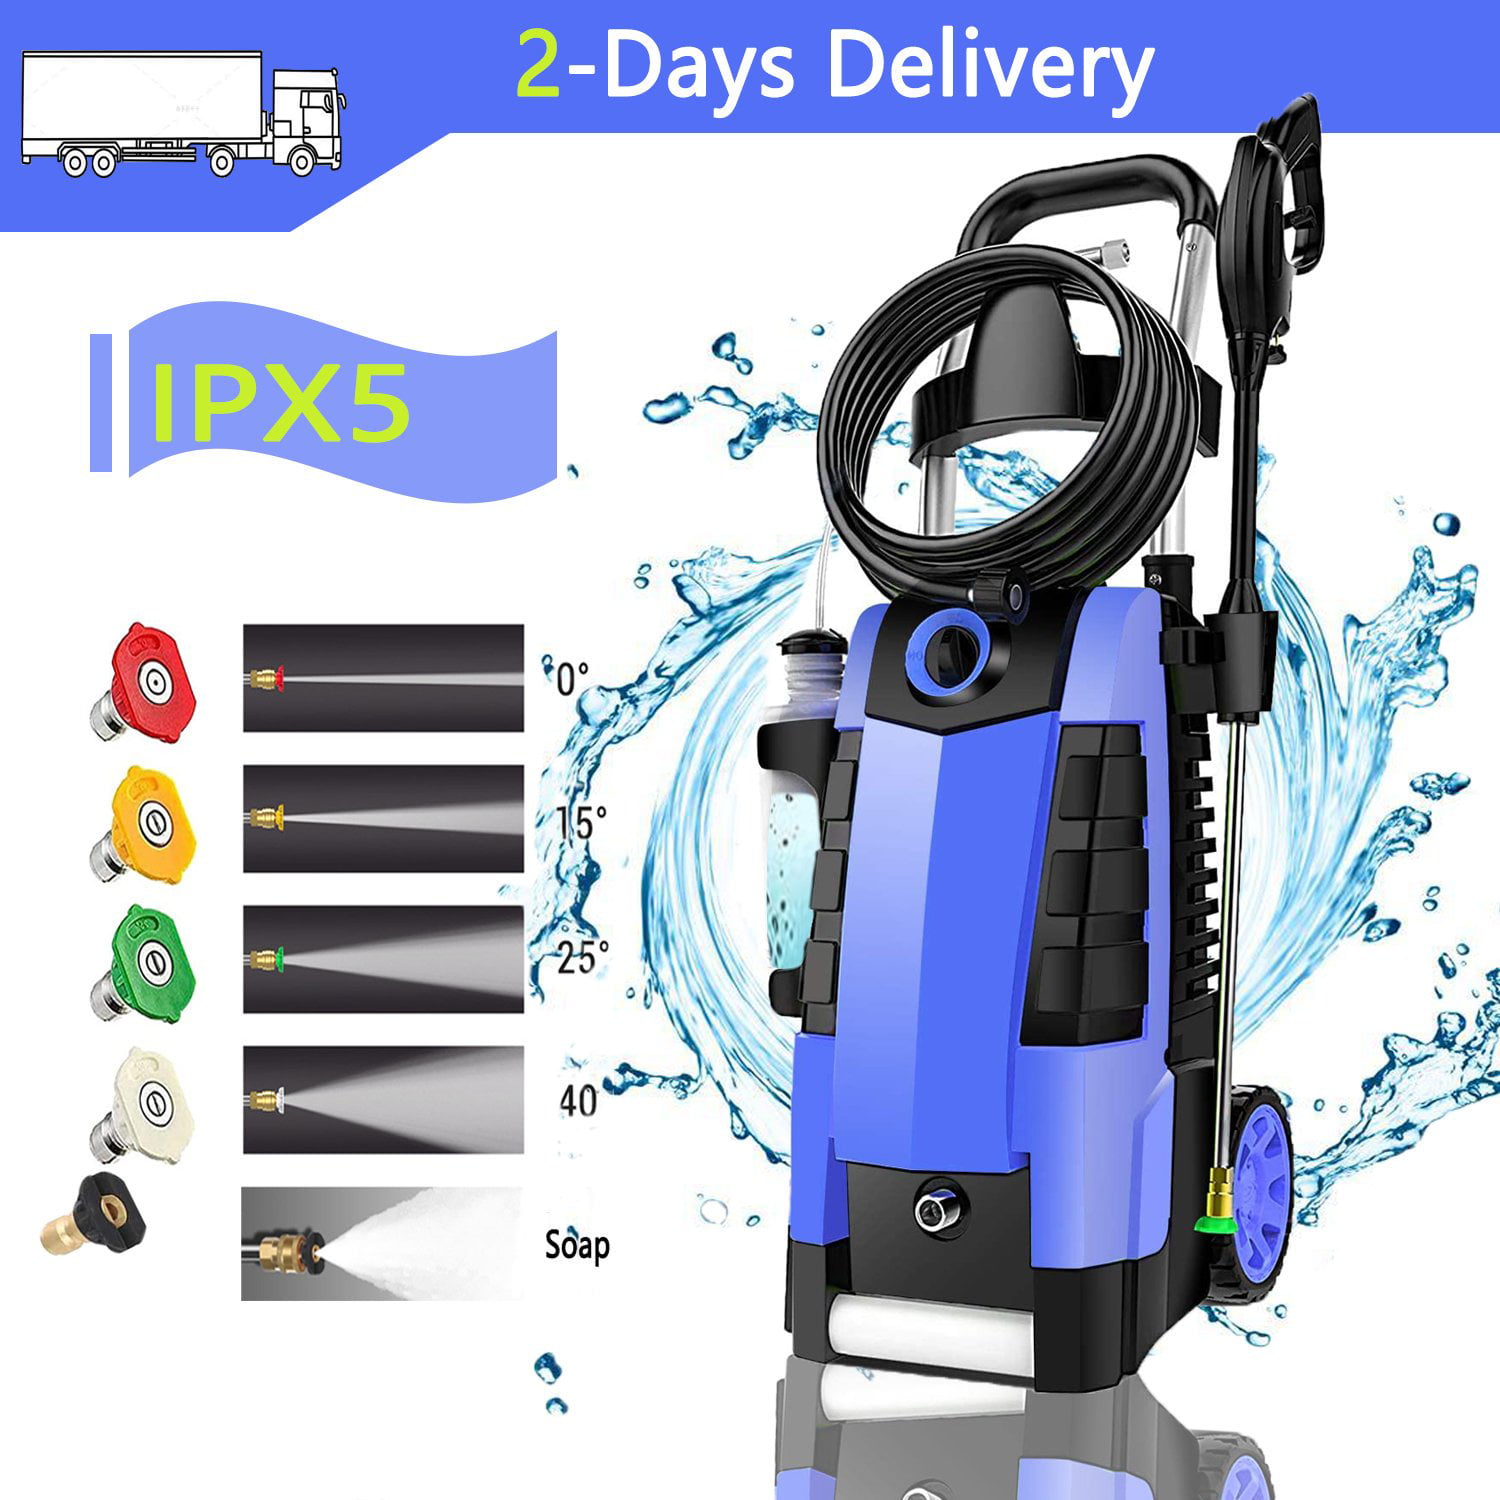 Upgrade 2100PSI Electric High Pressure Washer,1.9GPM Professional IPX5 Electric Cleaner Machine with 5 Adjustable Nozzles and Detergent Bottle, GFCI